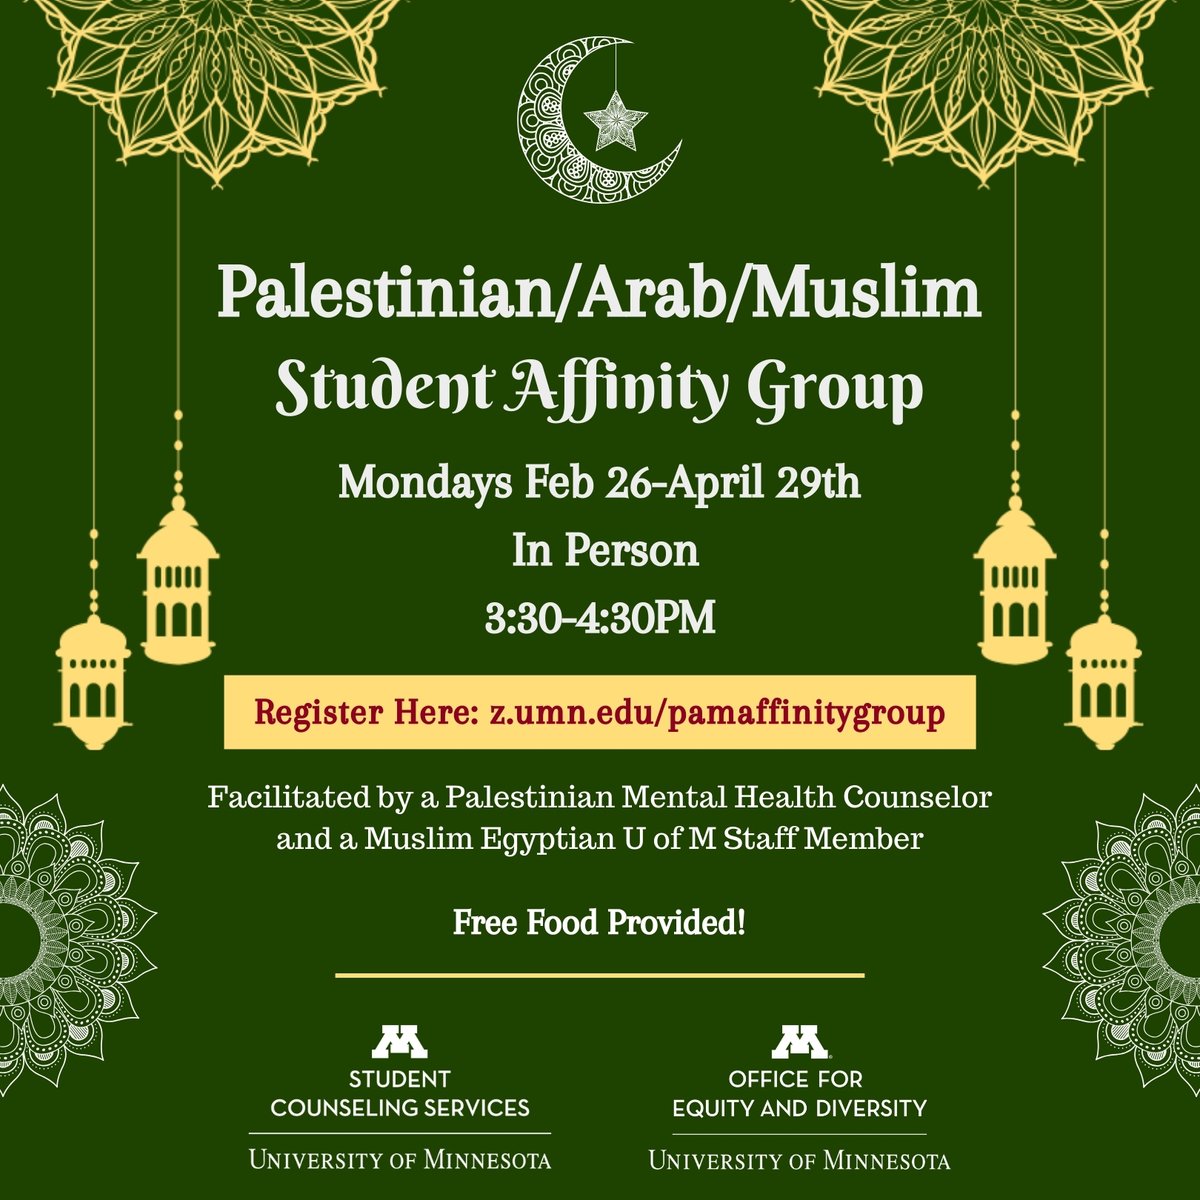 ❗️NEW STUDENT GROUP❗️This group invites students at the U of M to gather & support one another in their experiences & identities as Palestinian, Arab, and/or Muslim students. Register: z.umn.edu/PAMaffinitygro… List of affinity/counseling groups at @umnscs: z.umn.edu/SCSaffinity